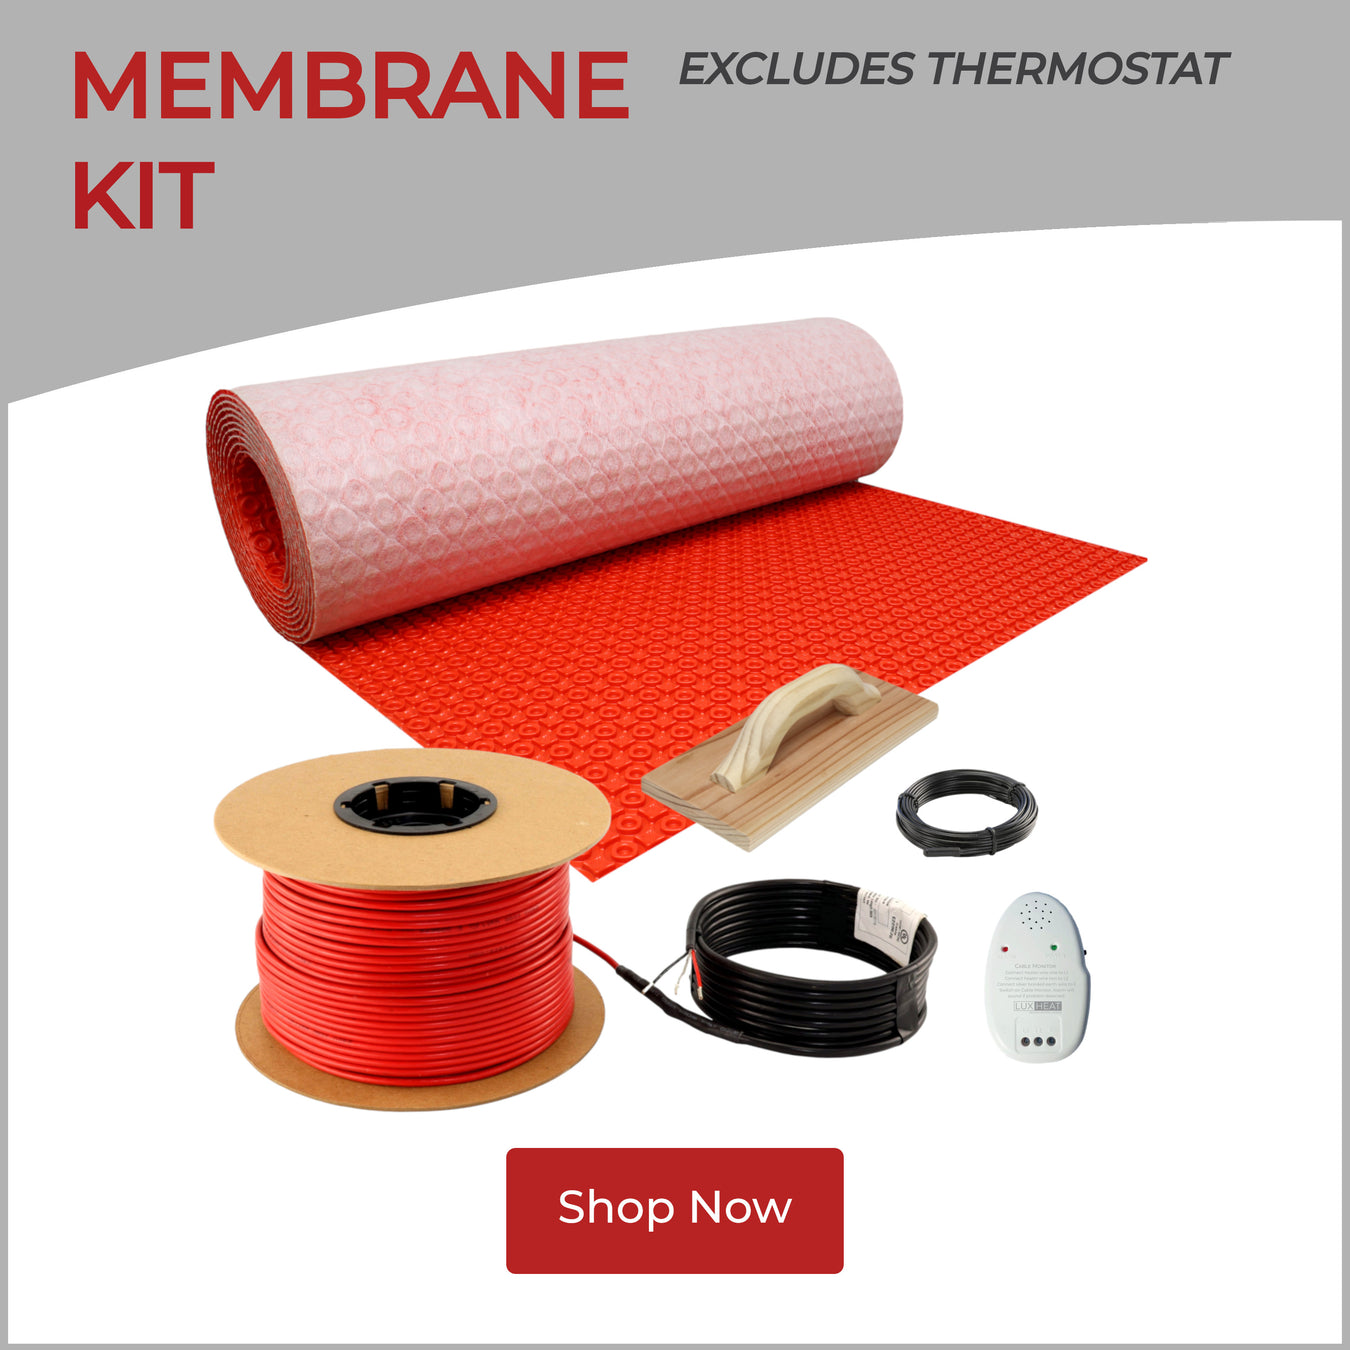 Overview_-_Membrane_Kit_with_no_thermostat